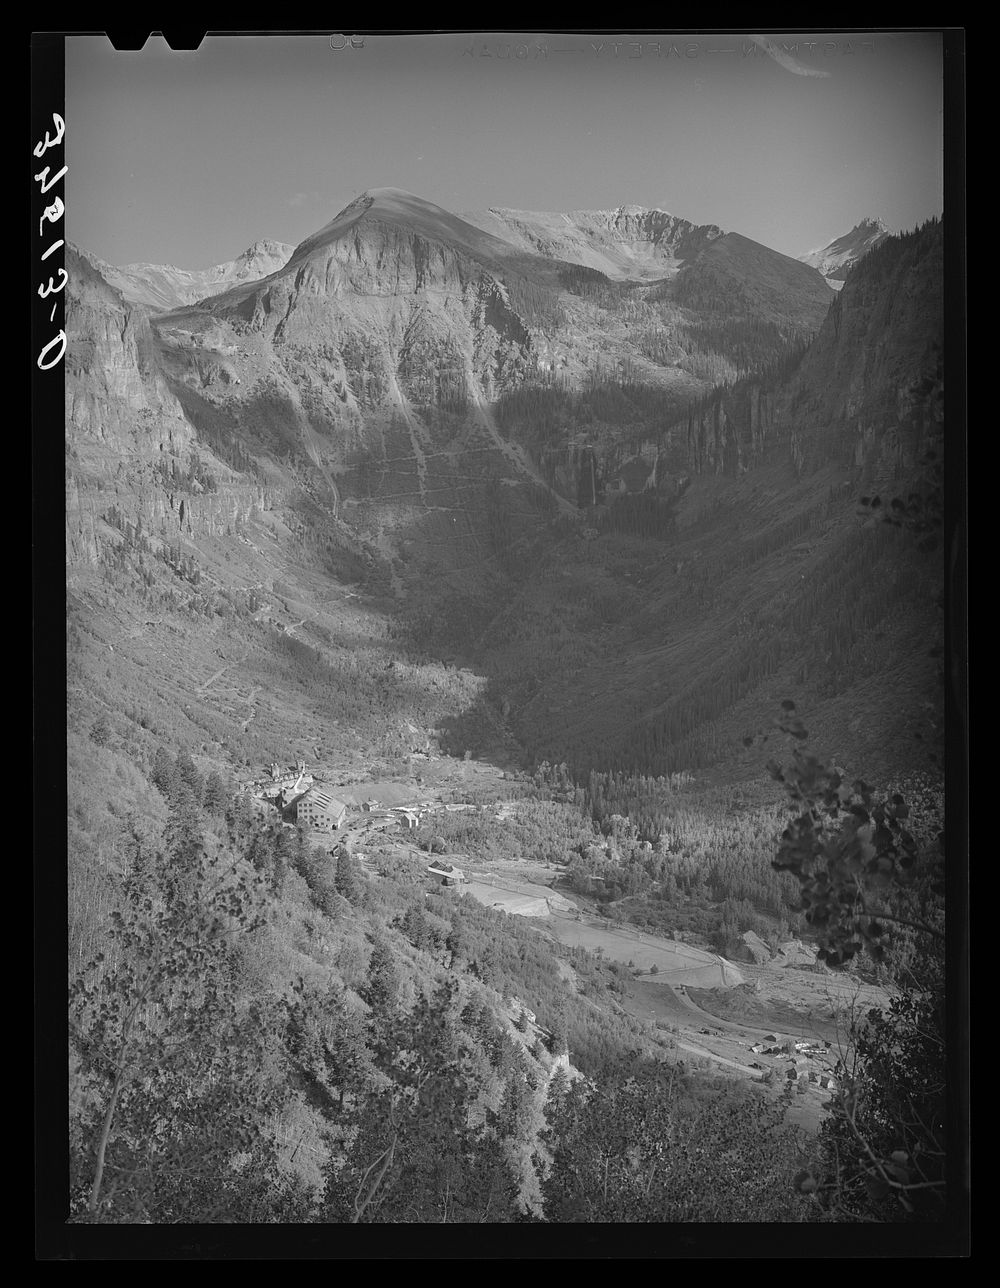 Mountain valley near Telluride showing gold mill and Bridal Veil Falls and road winding around mountain up to the mine. San…